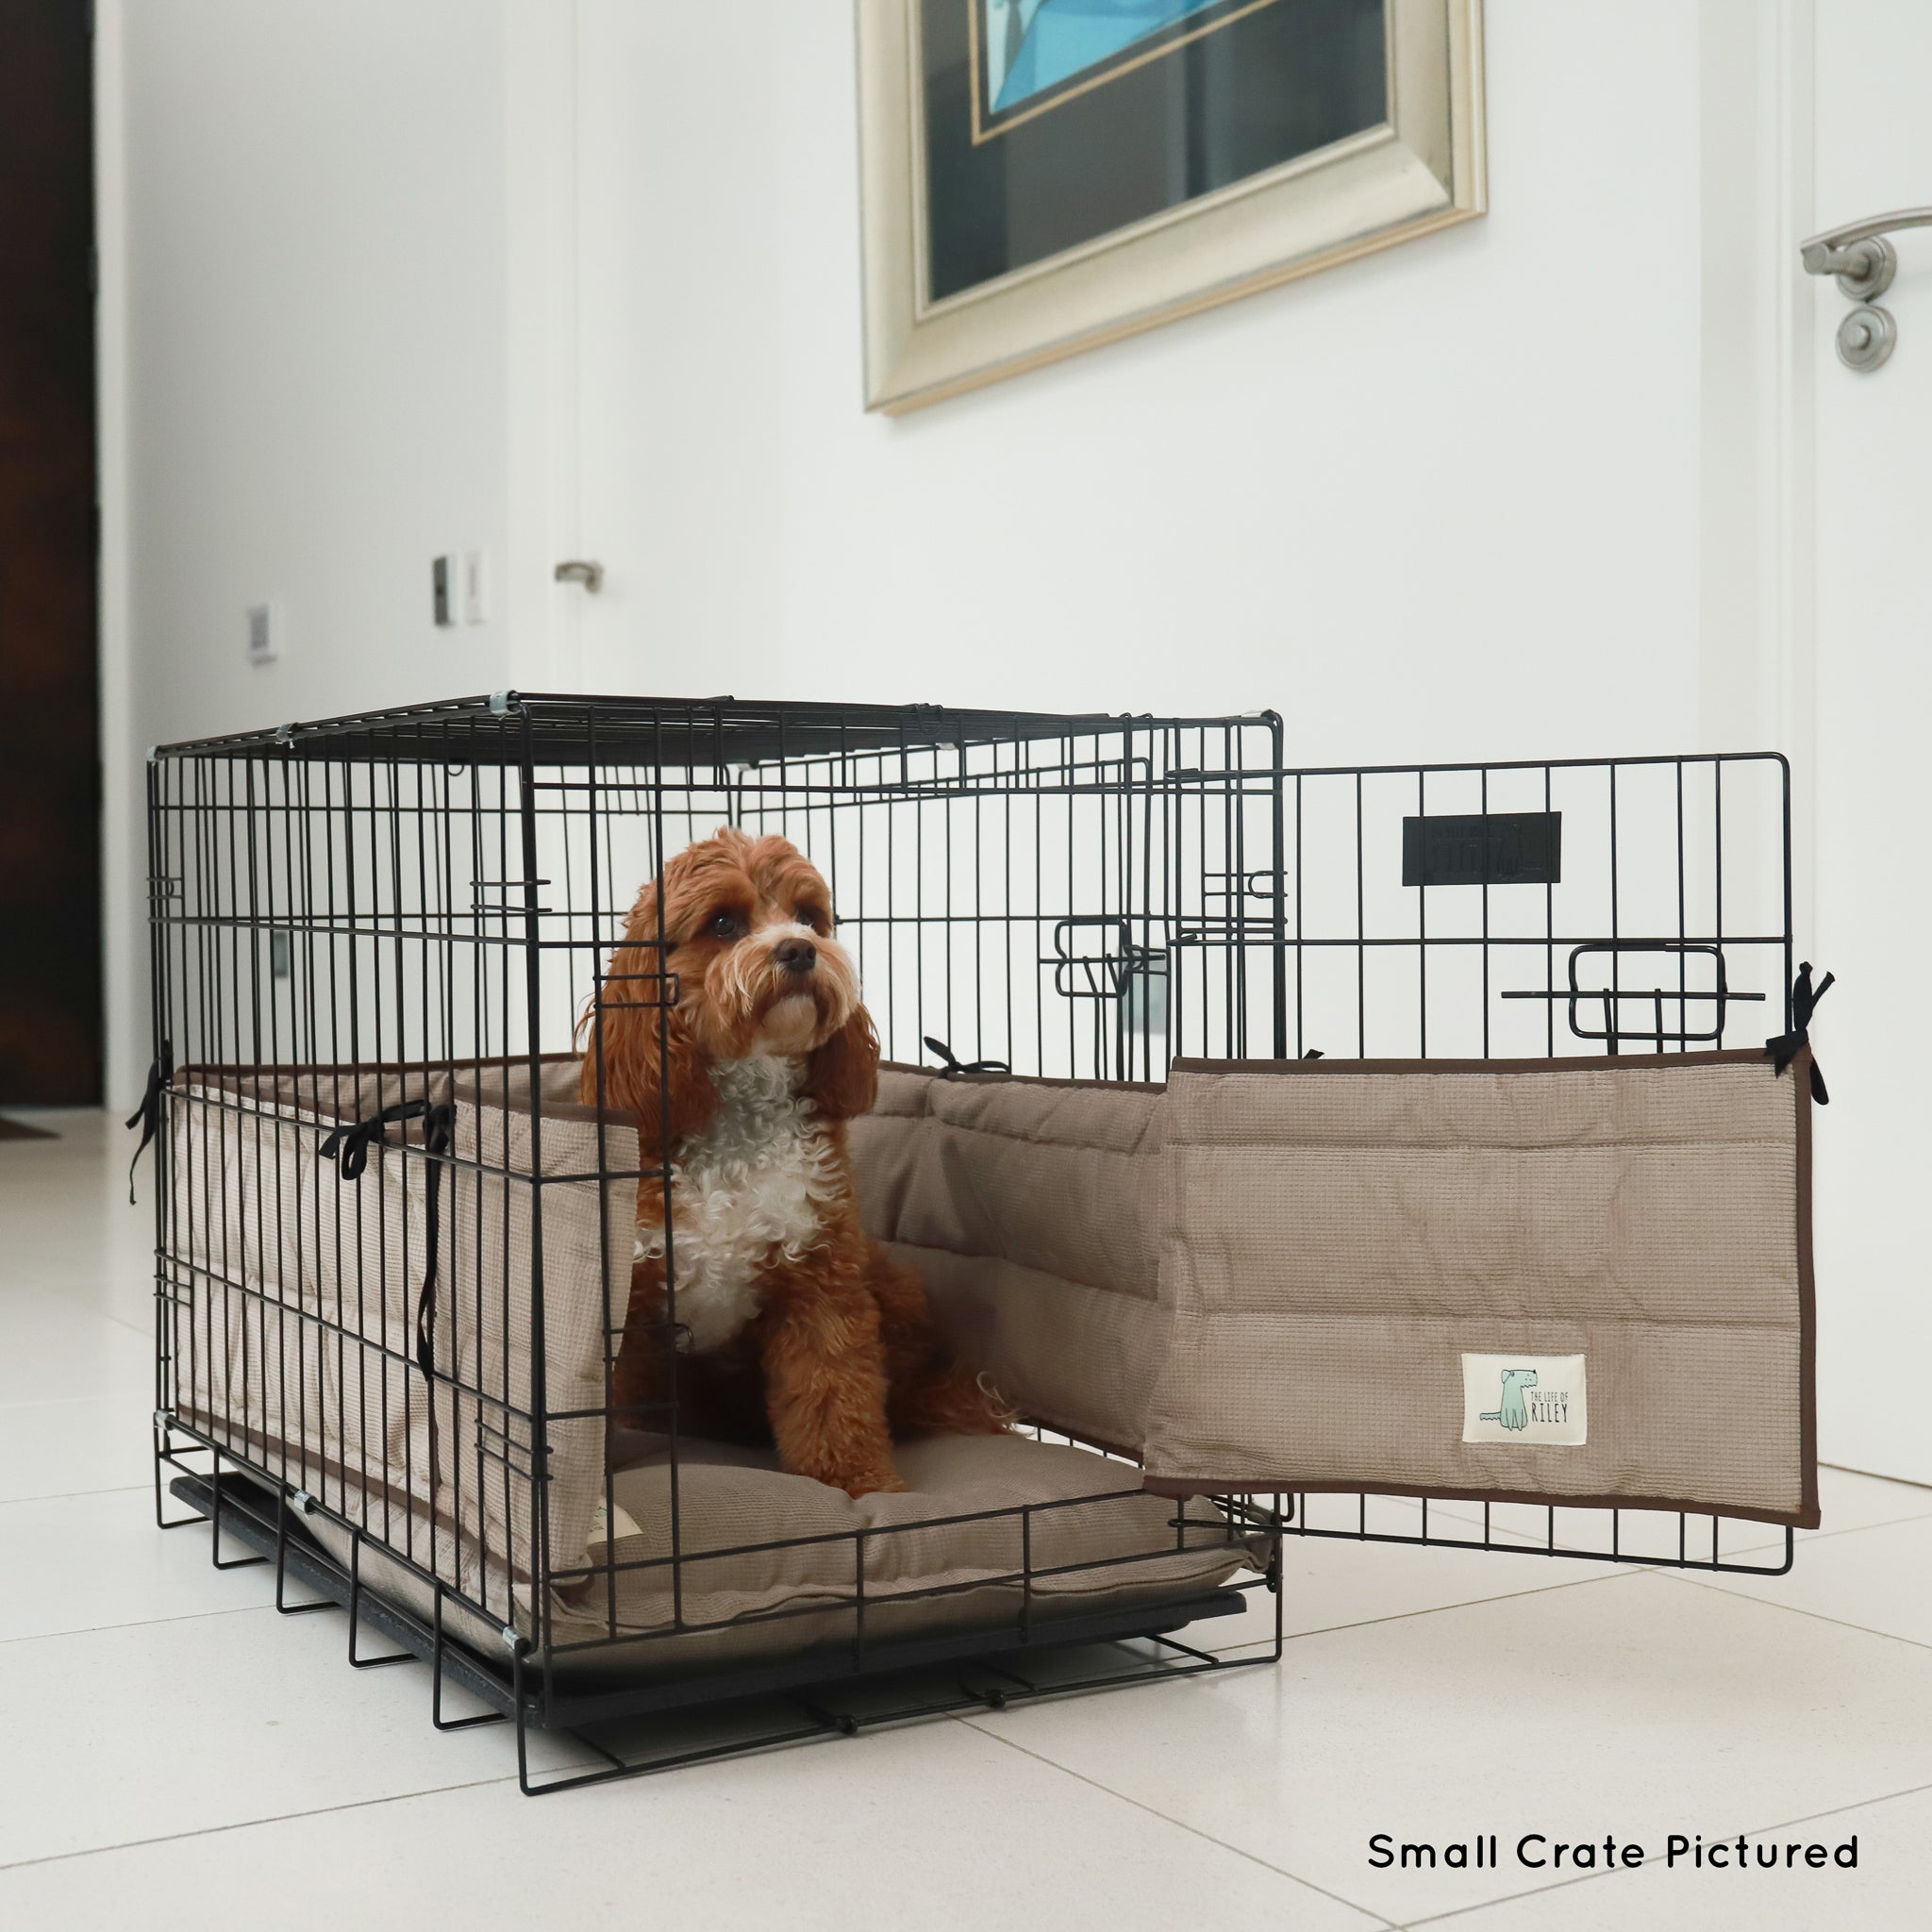 Dog Crate Bumper Life of Riley Pet Products  The Life of Riley